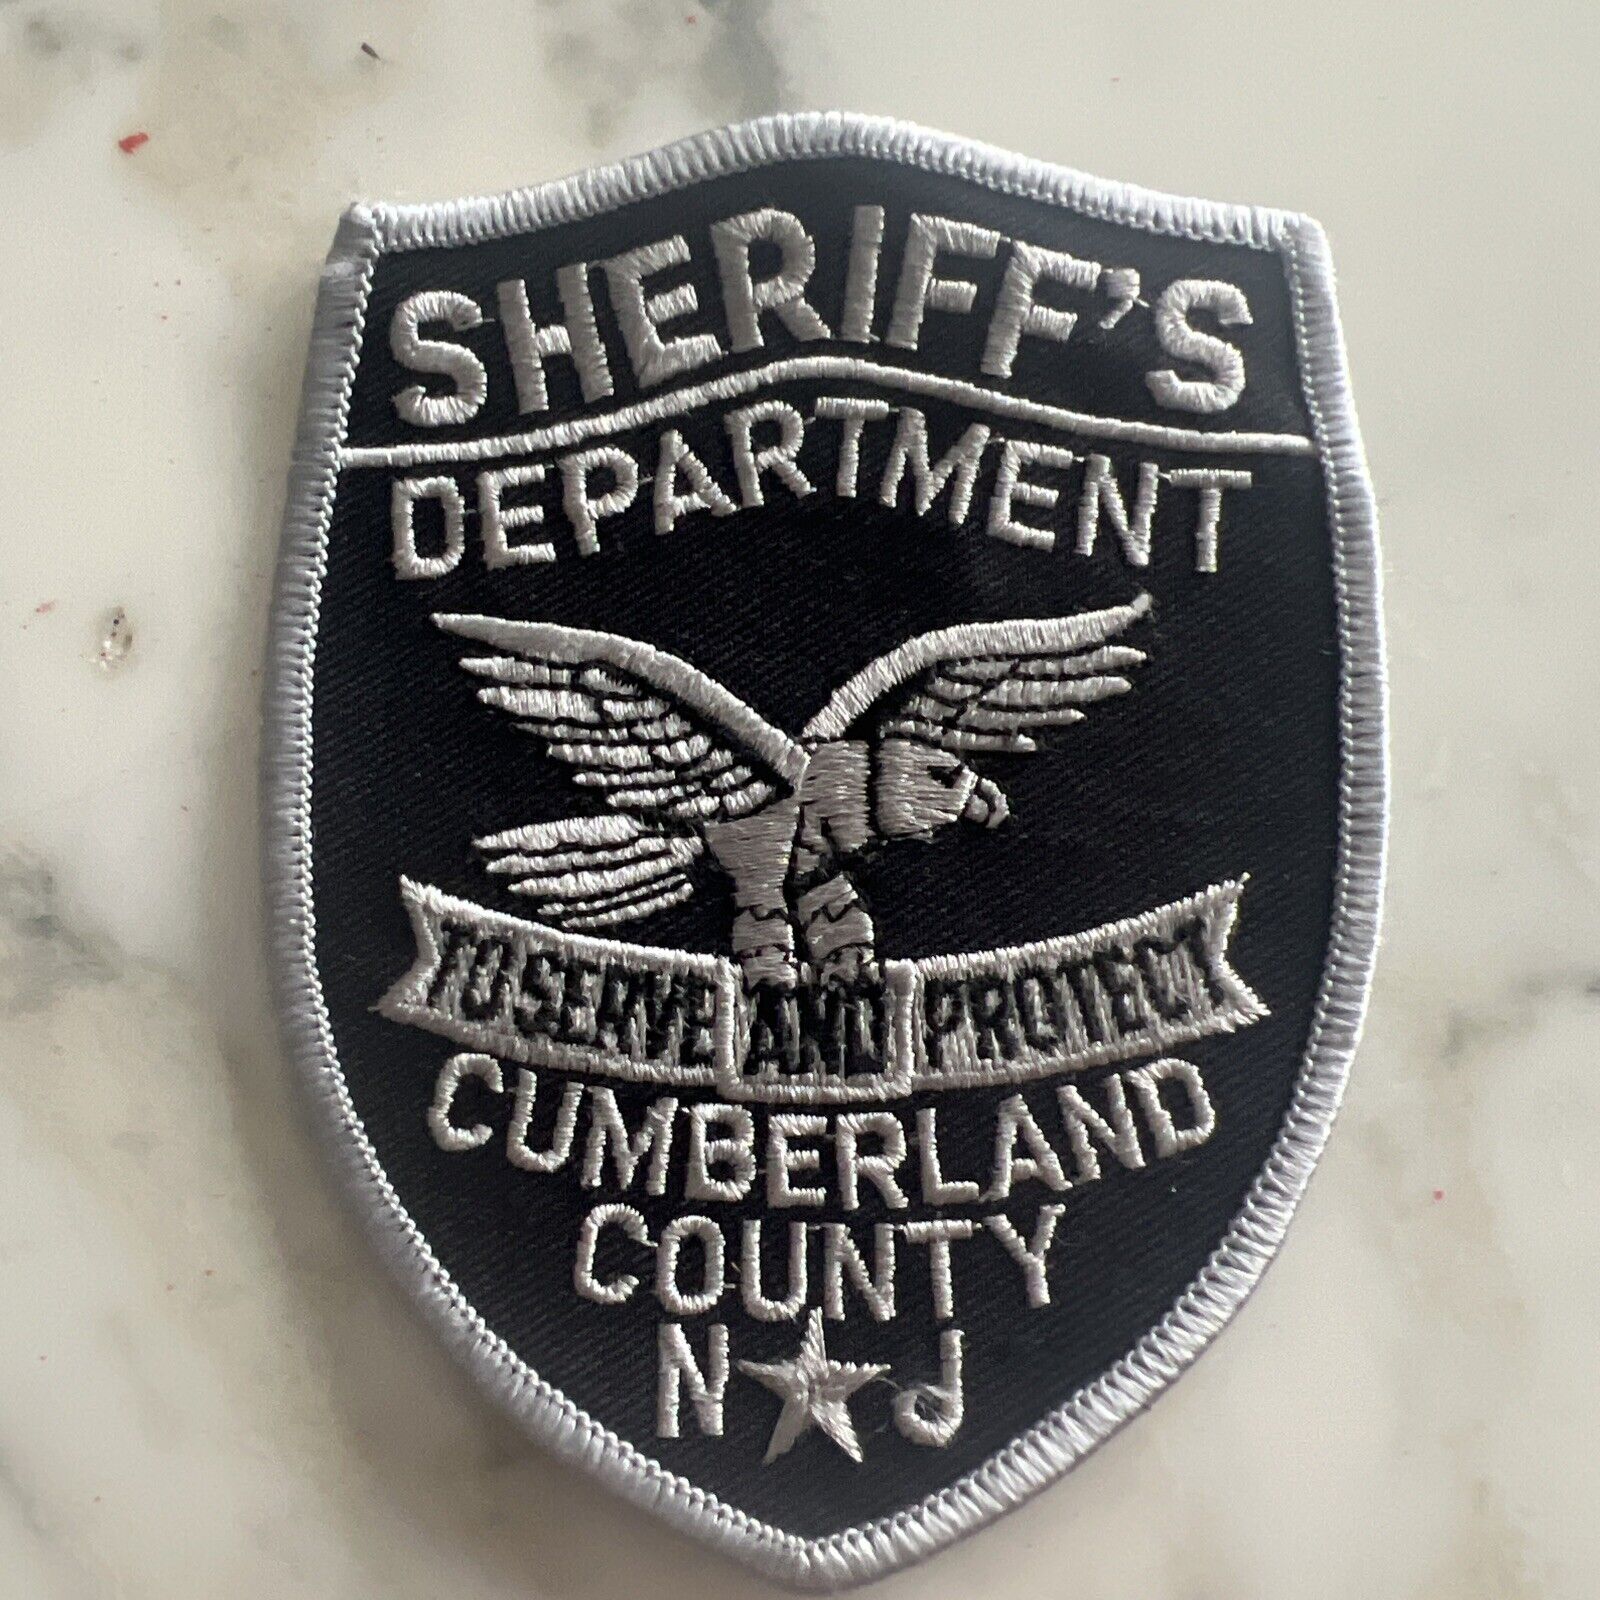 Sheriffs Depr Cumberland County NJ Vintage Woven Embroidered Patches.New 9x11 Cm